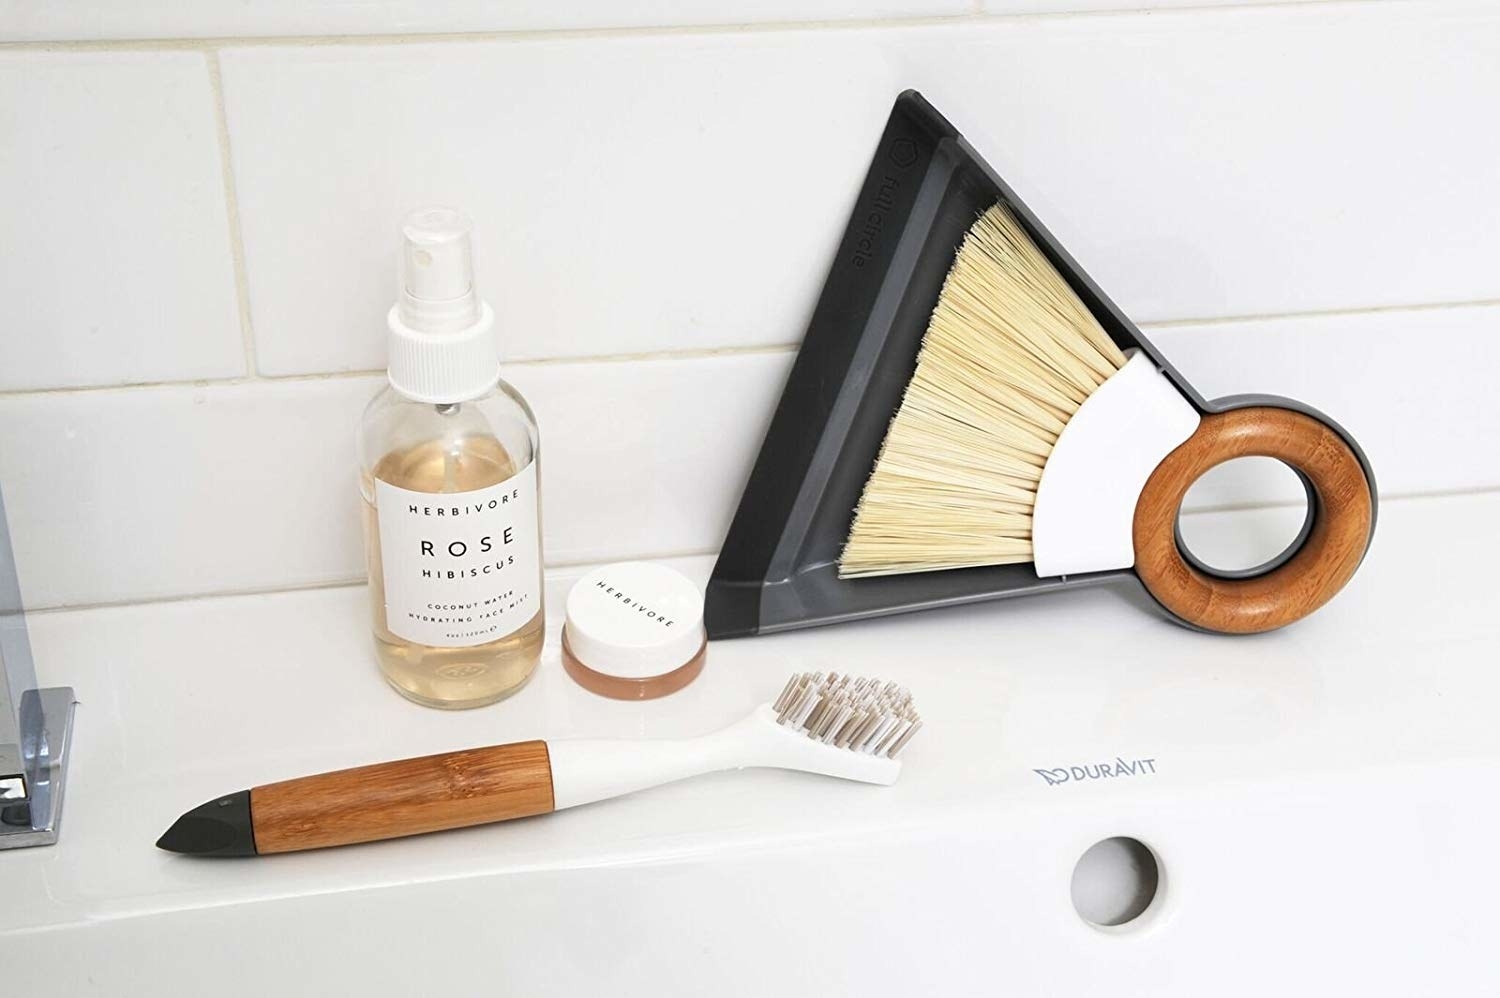 minimalist dustpan with a brush that fits inside it and a round wooden handle